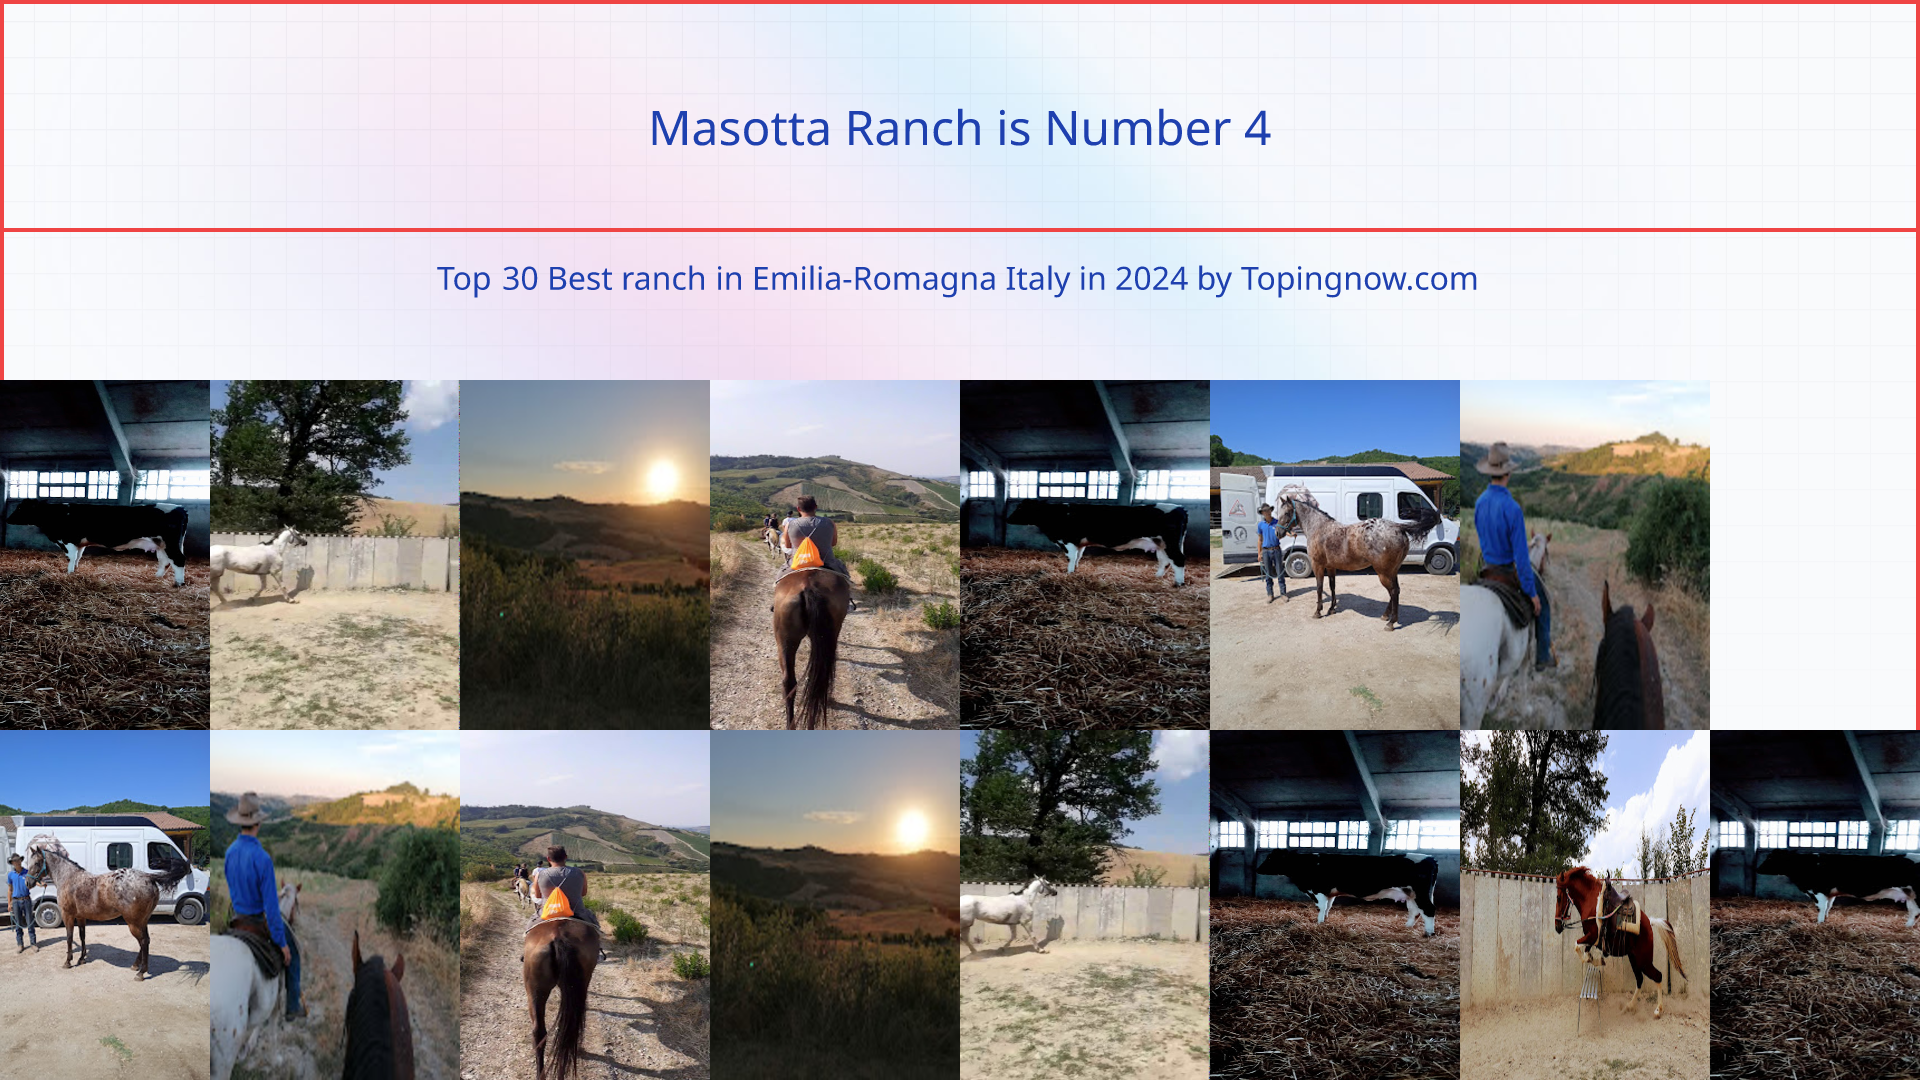 Masotta Ranch: Top 30 Best ranch in Emilia-Romagna Italy in 2024